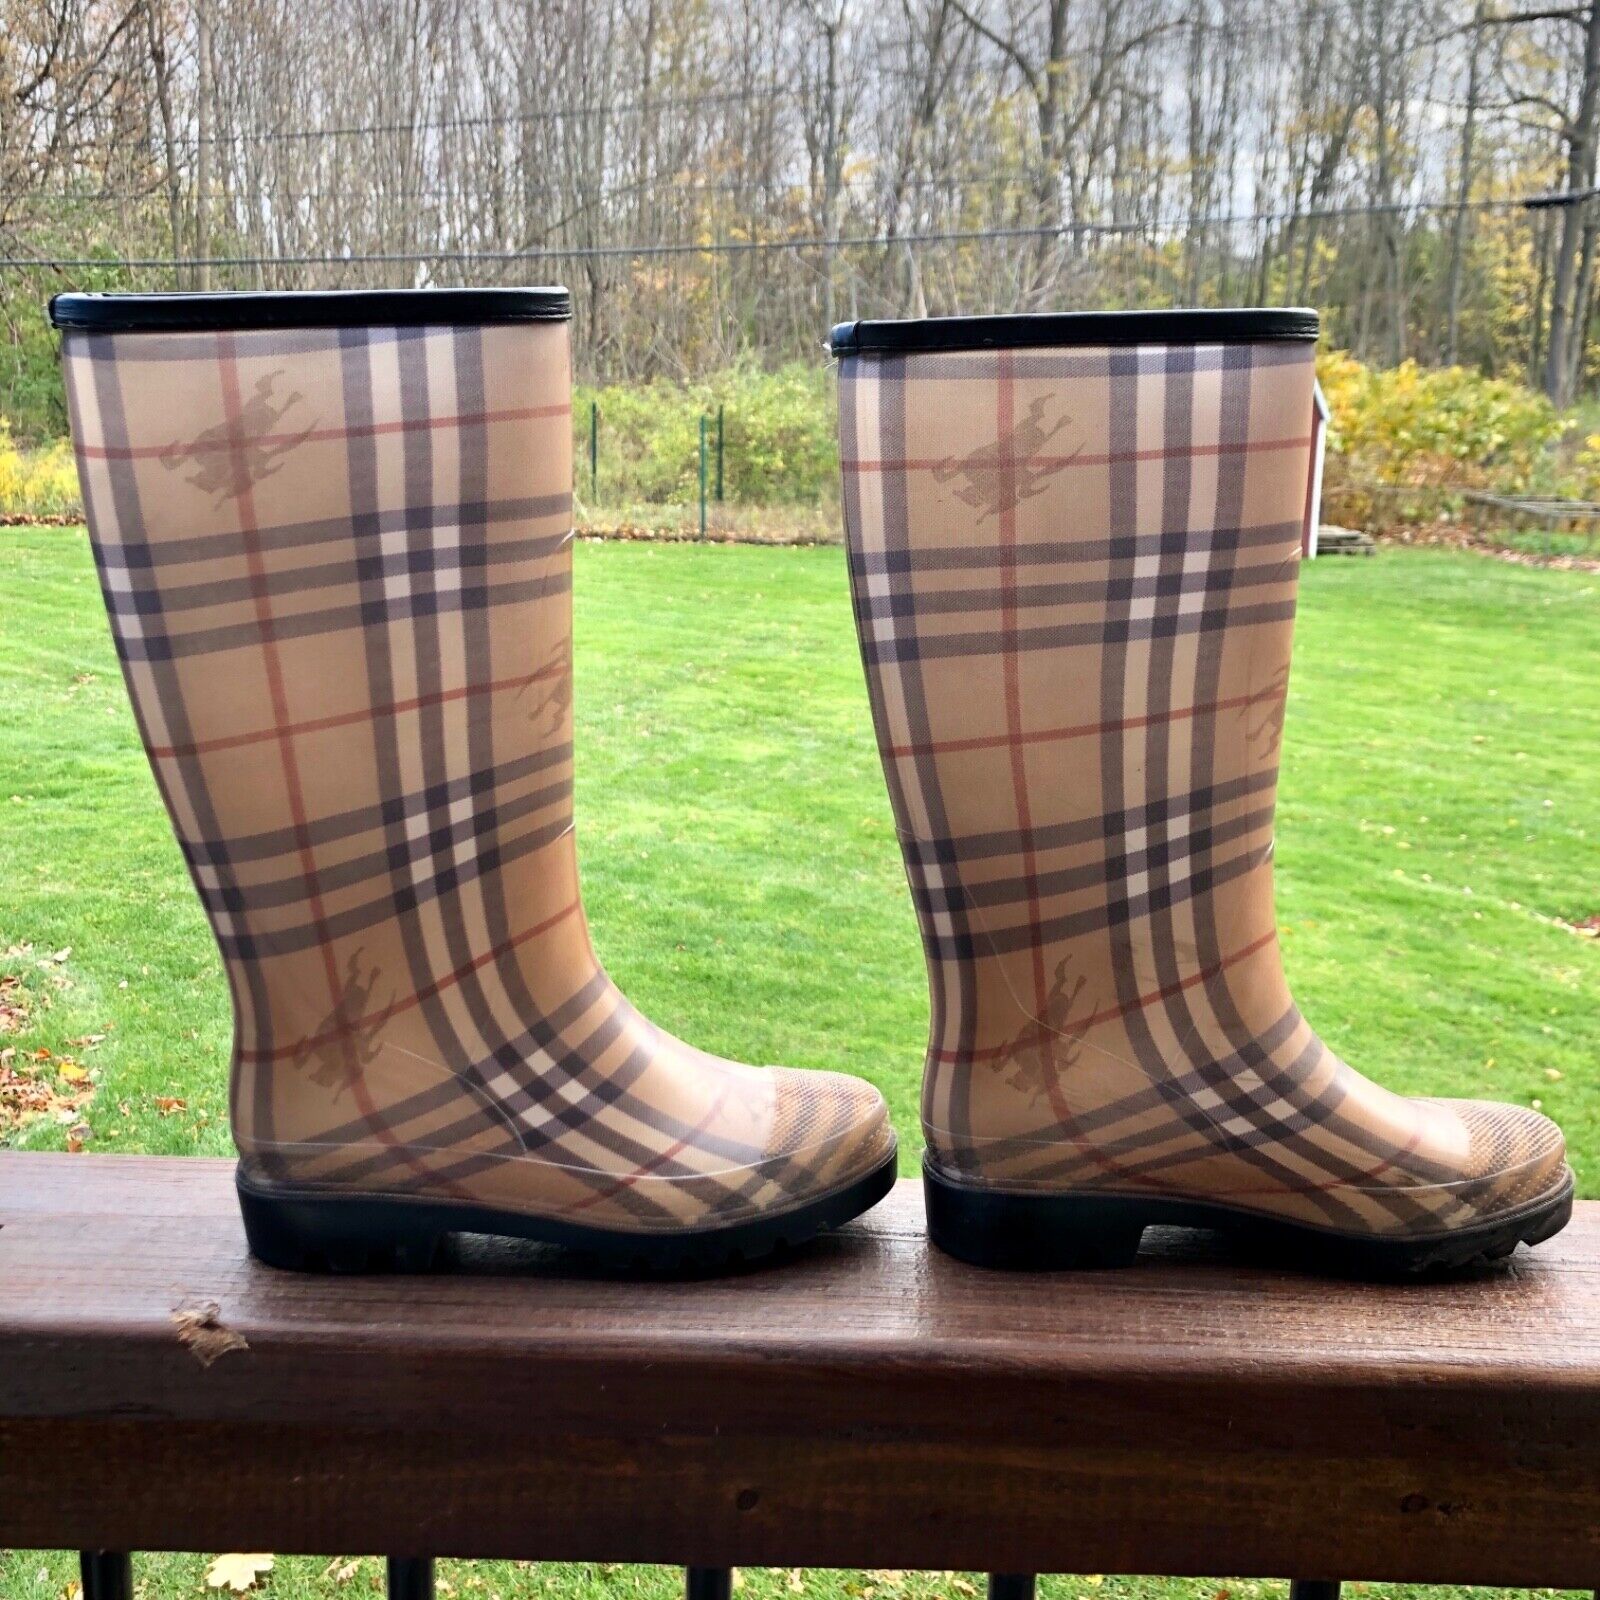 Stand Tall in Elder Ford: Burberry Rain Boots